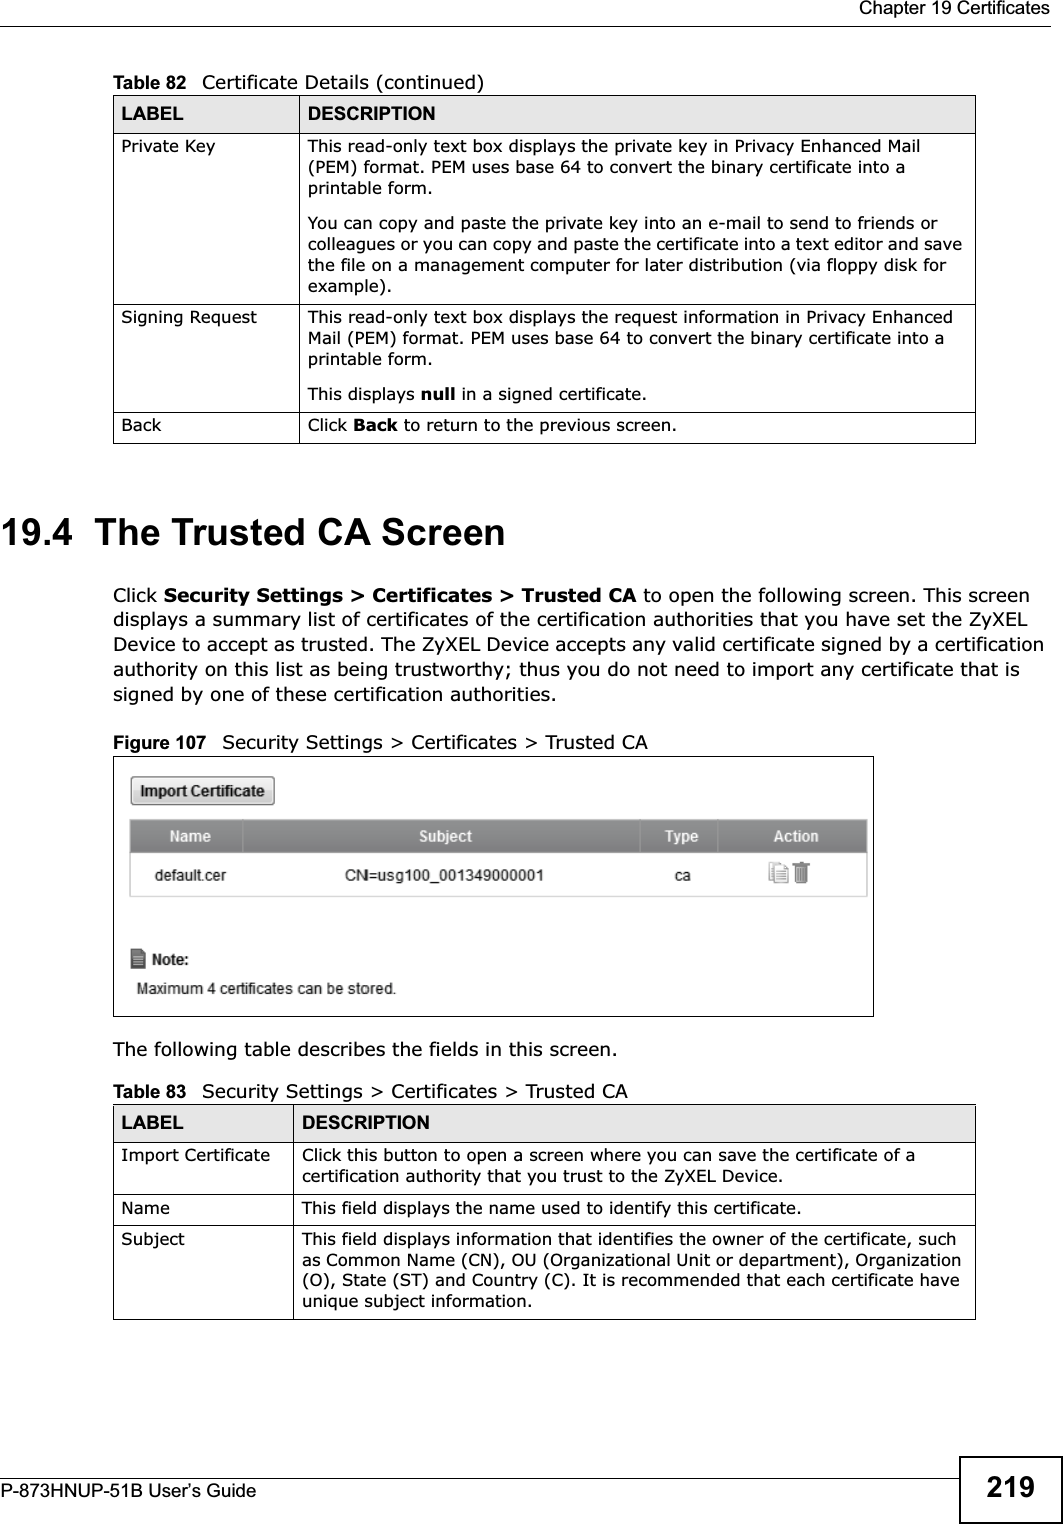  Chapter 19 CertificatesP-873HNUP-51B User’s Guide 21919.4  The Trusted CA ScreenClick Security Settings &gt; Certificates &gt; Trusted CA to open the following screen. This screen displays a summary list of certificates of the certification authorities that you have set the ZyXEL Device to accept as trusted. The ZyXEL Device accepts any valid certificate signed by a certification authority on this list as being trustworthy; thus you do not need to import any certificate that is signed by one of these certification authorities. Figure 107   Security Settings &gt; Certificates &gt; Trusted CA The following table describes the fields in this screen. Private Key This read-only text box displays the private key in Privacy Enhanced Mail (PEM) format. PEM uses base 64 to convert the binary certificate into a printable form. You can copy and paste the private key into an e-mail to send to friends or colleagues or you can copy and paste the certificate into a text editor and save the file on a management computer for later distribution (via floppy disk for example).Signing Request This read-only text box displays the request information in Privacy Enhanced Mail (PEM) format. PEM uses base 64 to convert the binary certificate into a printable form. This displays null in a signed certificate.Back Click Back to return to the previous screen.Table 82   Certificate Details (continued)LABEL DESCRIPTIONTable 83   Security Settings &gt; Certificates &gt; Trusted CALABEL DESCRIPTIONImport Certificate Click this button to open a screen where you can save the certificate of a certification authority that you trust to the ZyXEL Device.Name This field displays the name used to identify this certificate. Subject This field displays information that identifies the owner of the certificate, such as Common Name (CN), OU (Organizational Unit or department), Organization (O), State (ST) and Country (C). It is recommended that each certificate have unique subject information.